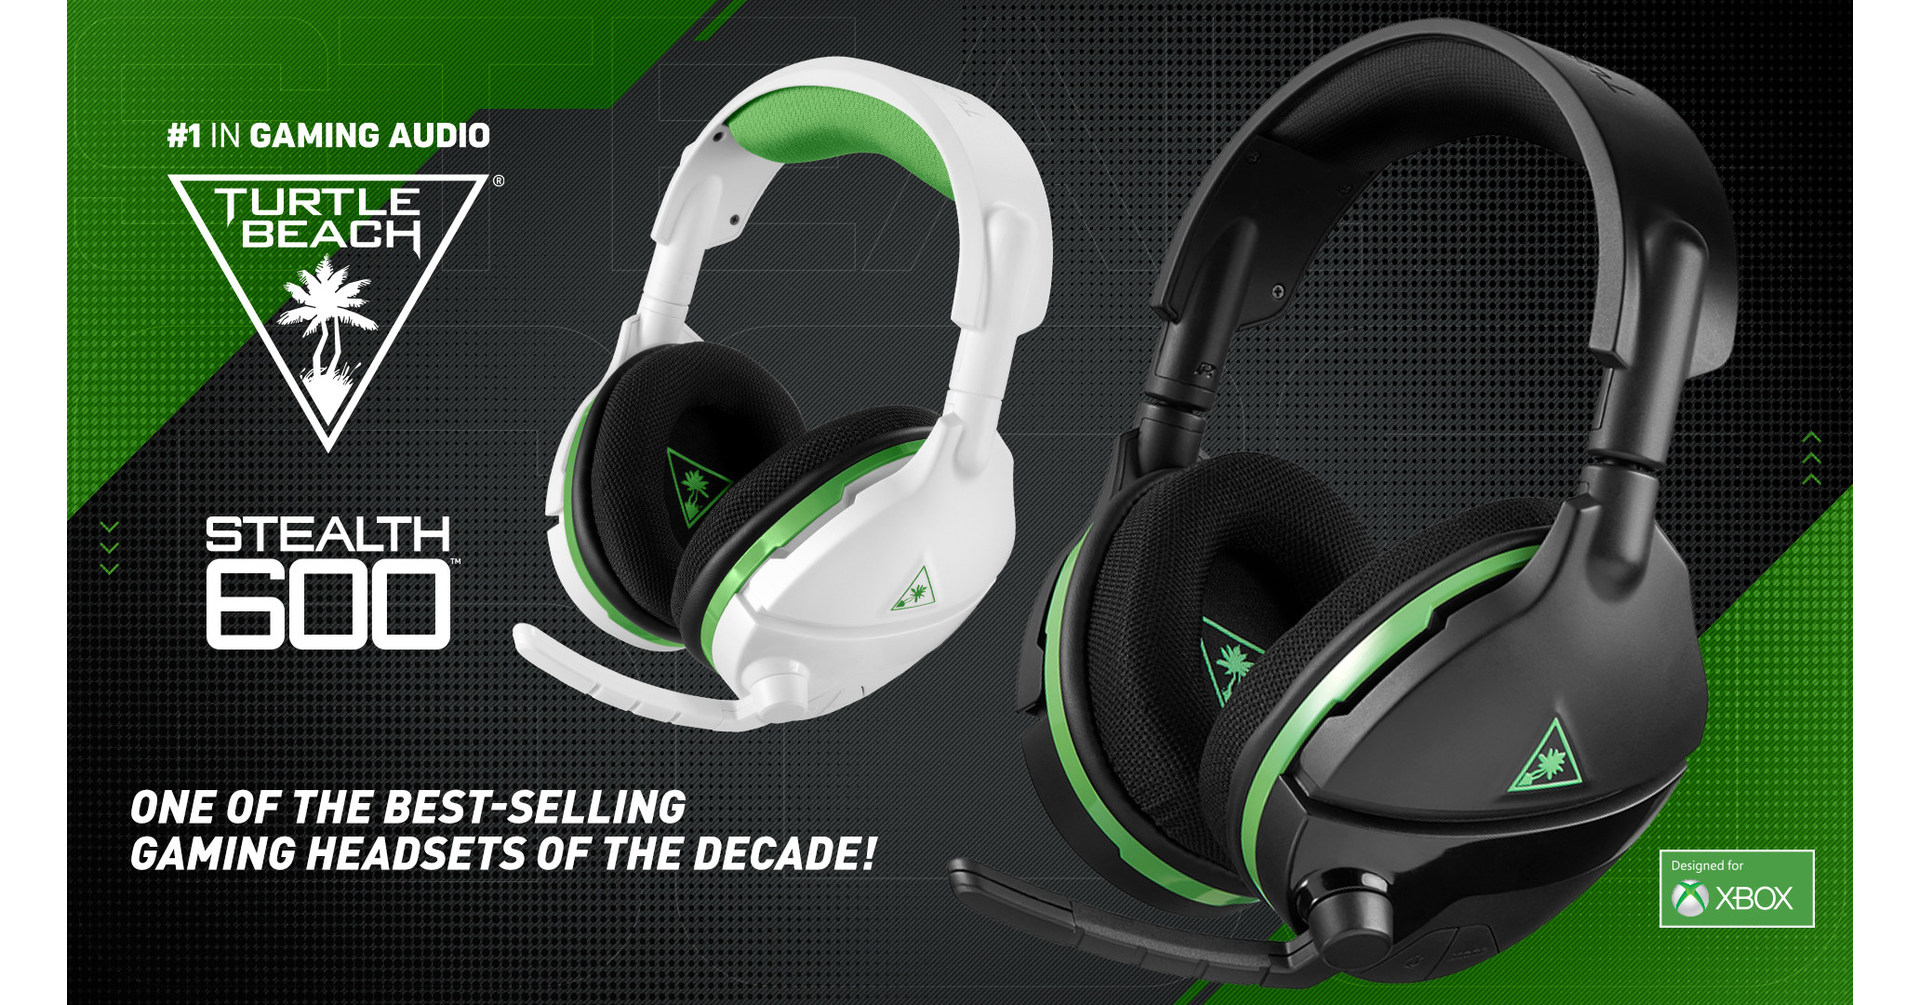 Turtle Beach® #1 Gaming Headsets - Hear Everything. Defeat Everyone.